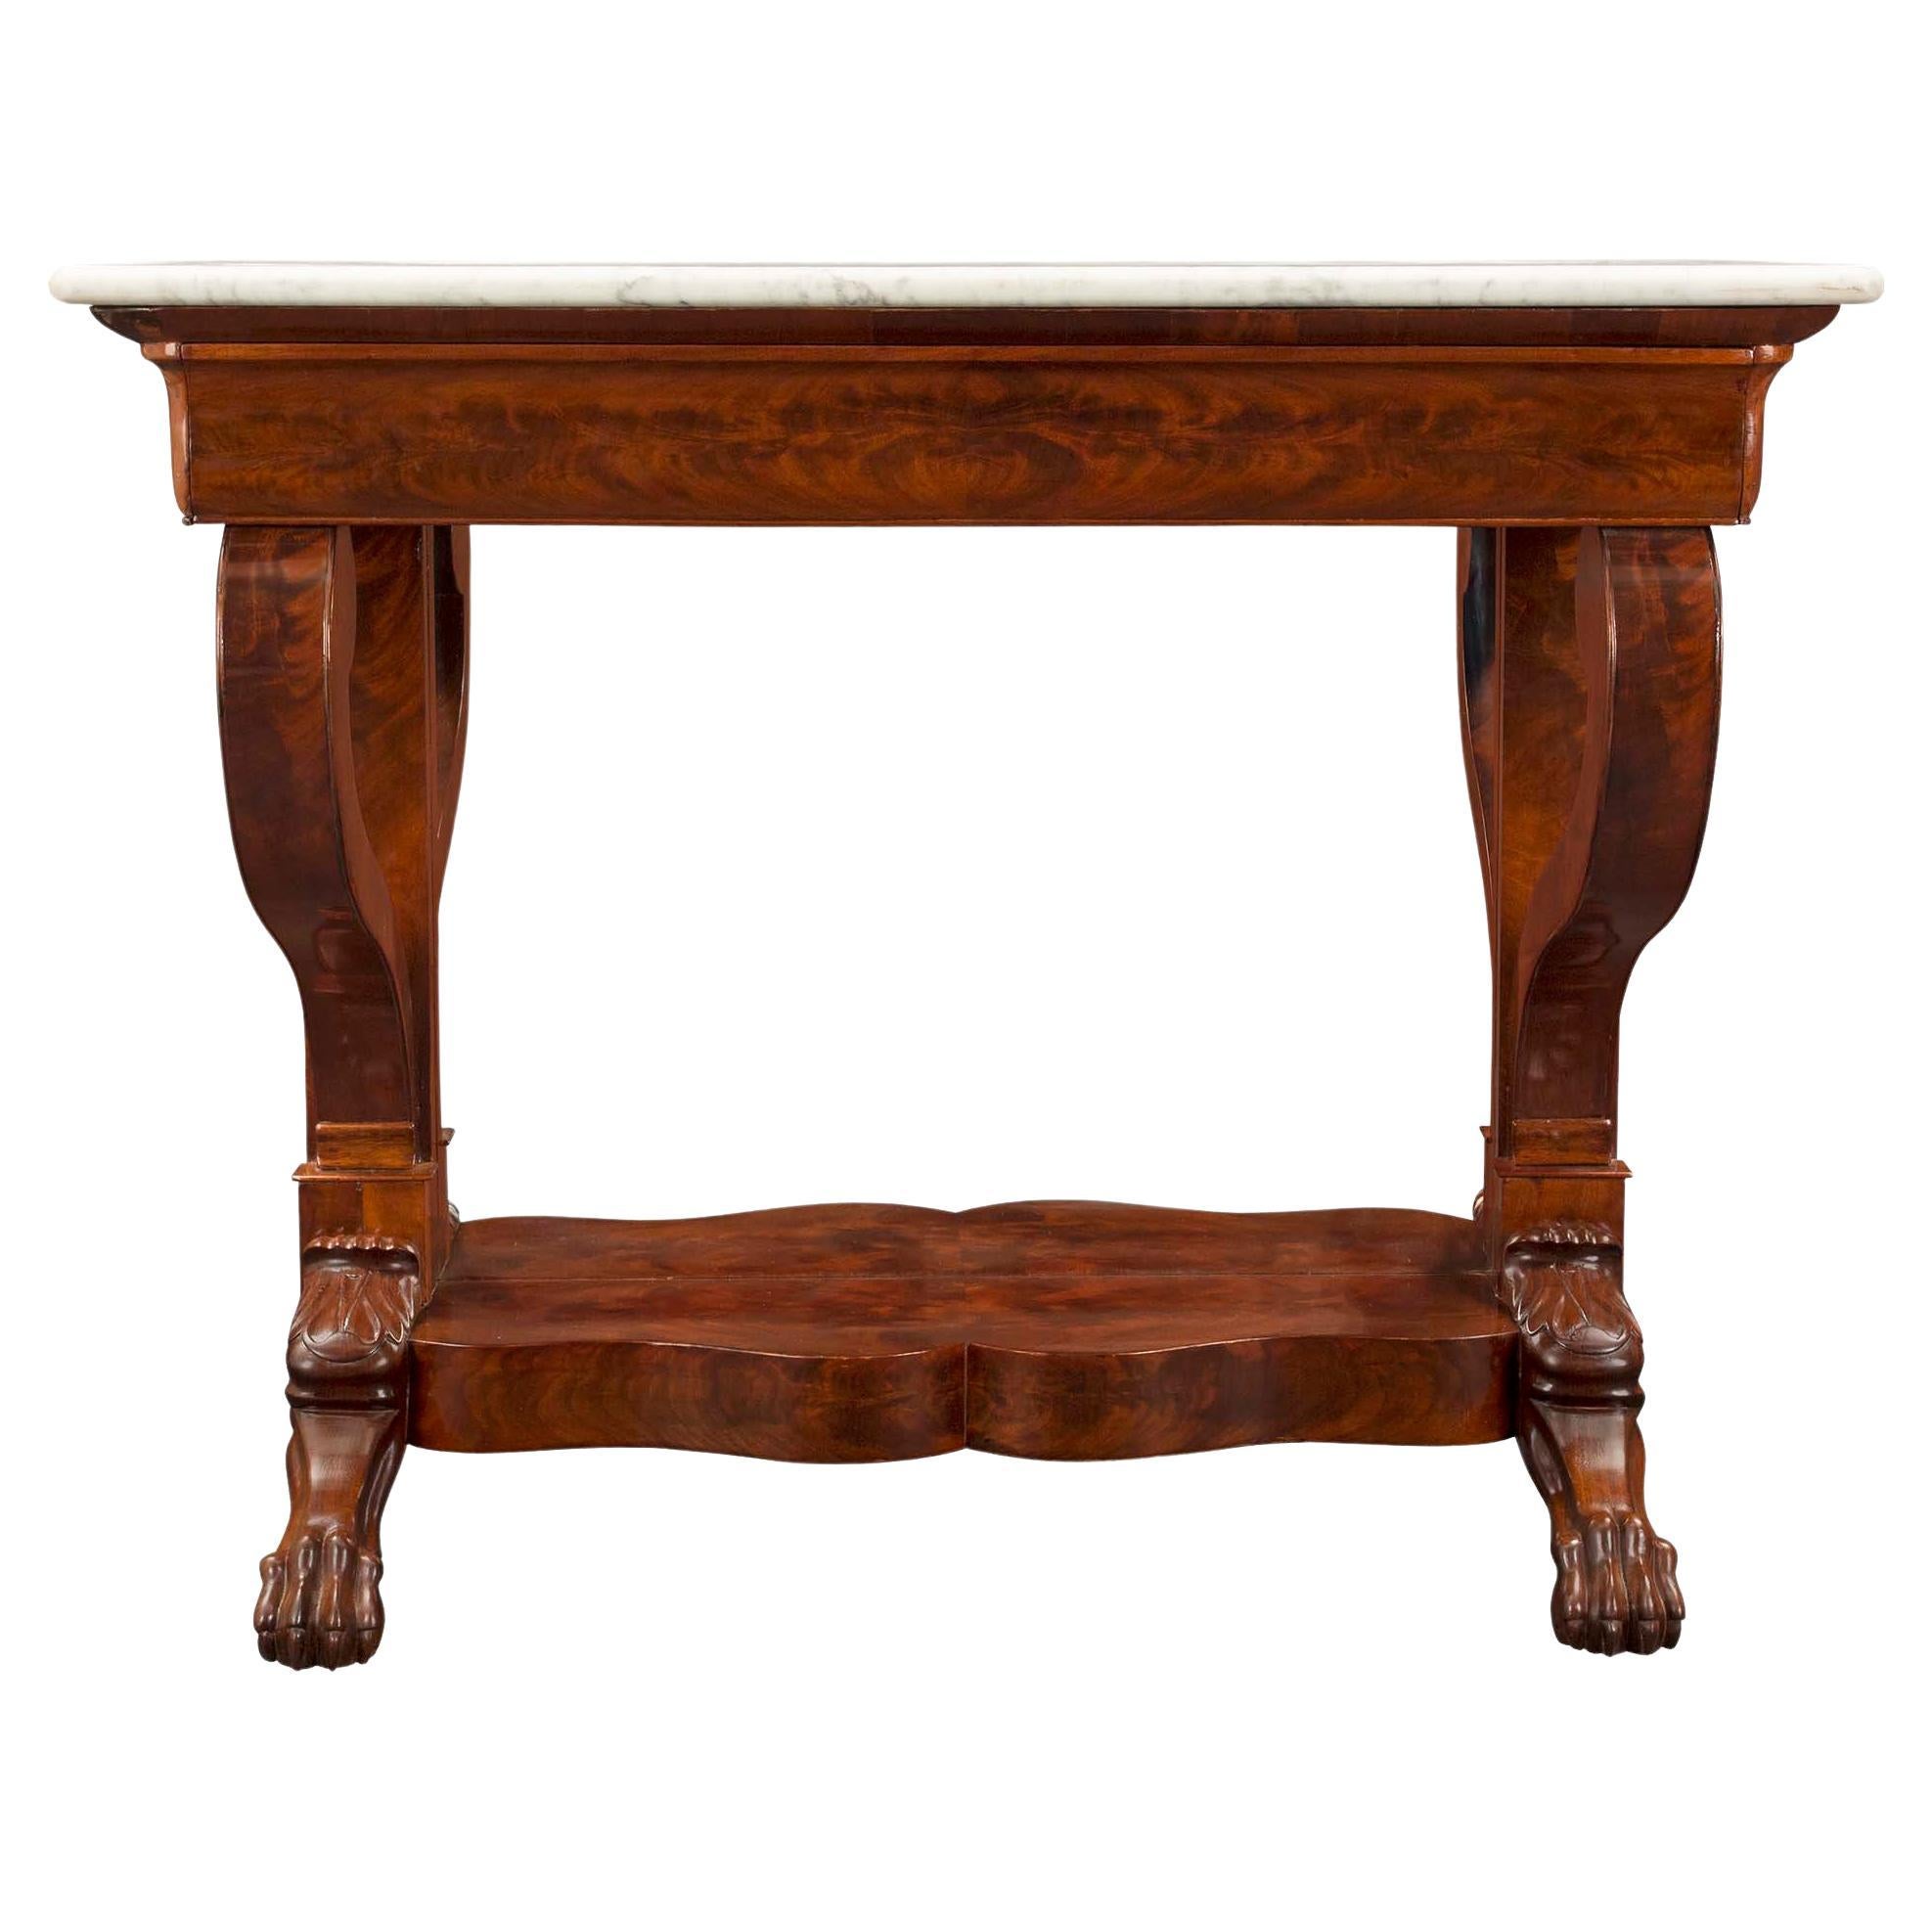 French 19th Century Empire Style Mahogany and Satinwood Inlaid Console